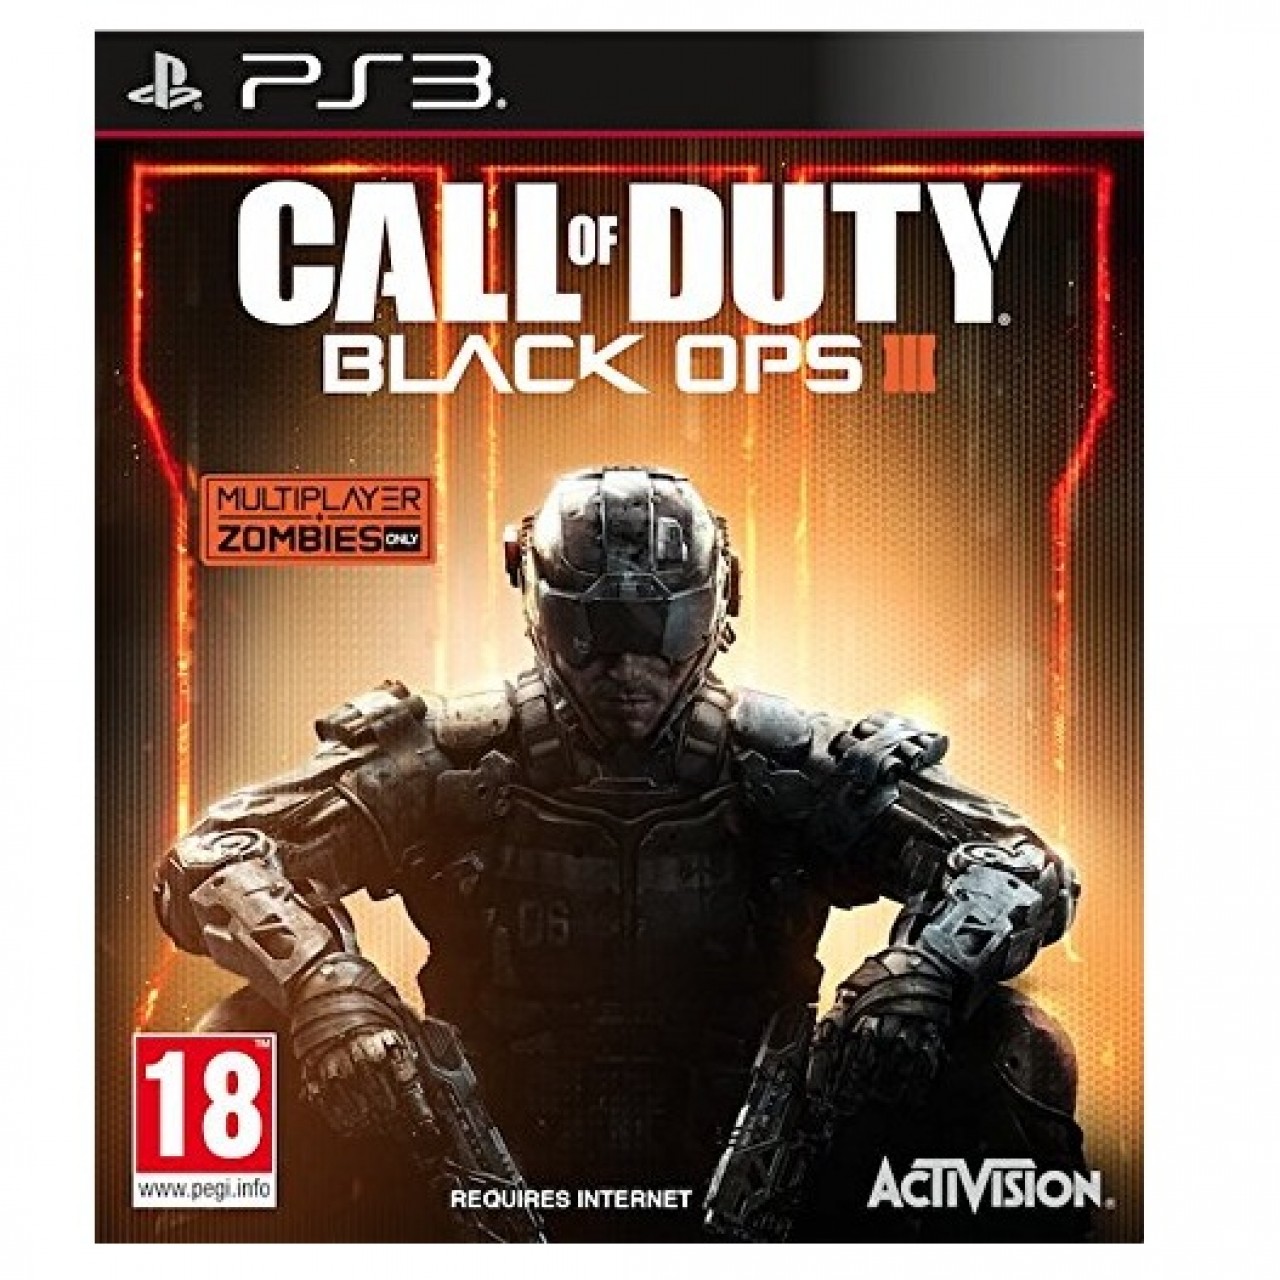 19. Black Ops III Call of Duty – PS3 – Deploys Players in Future – Men & Women Squads